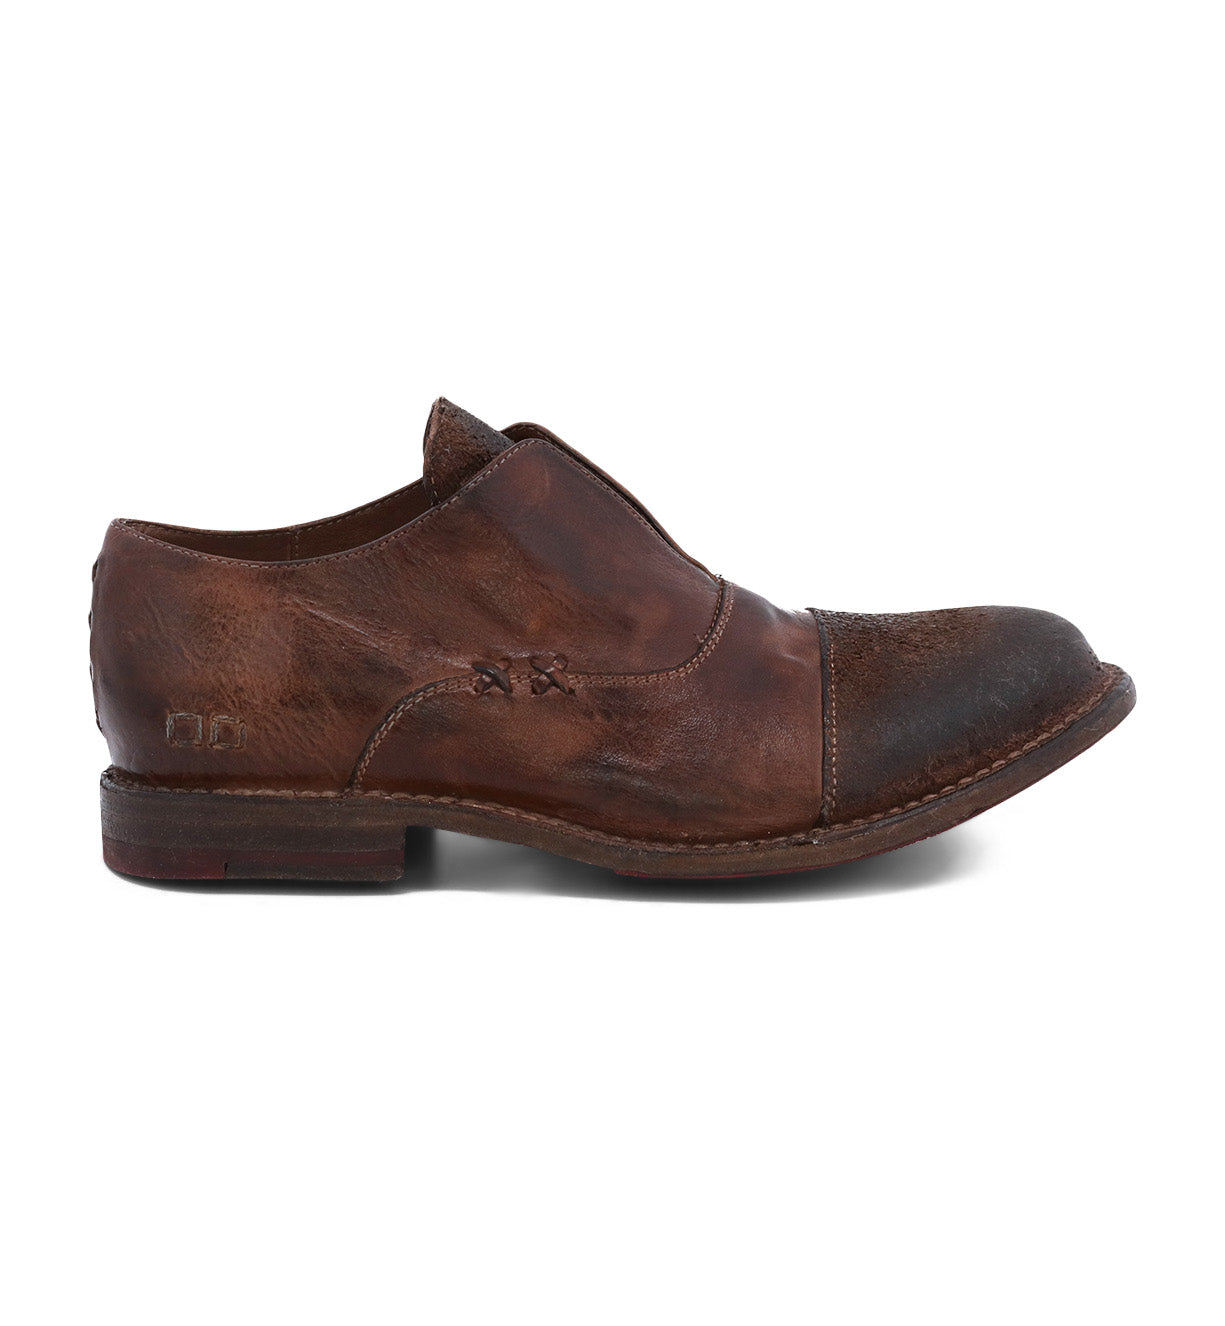 The Bed Stu Garden M men's brown leather shoe is on a white background.